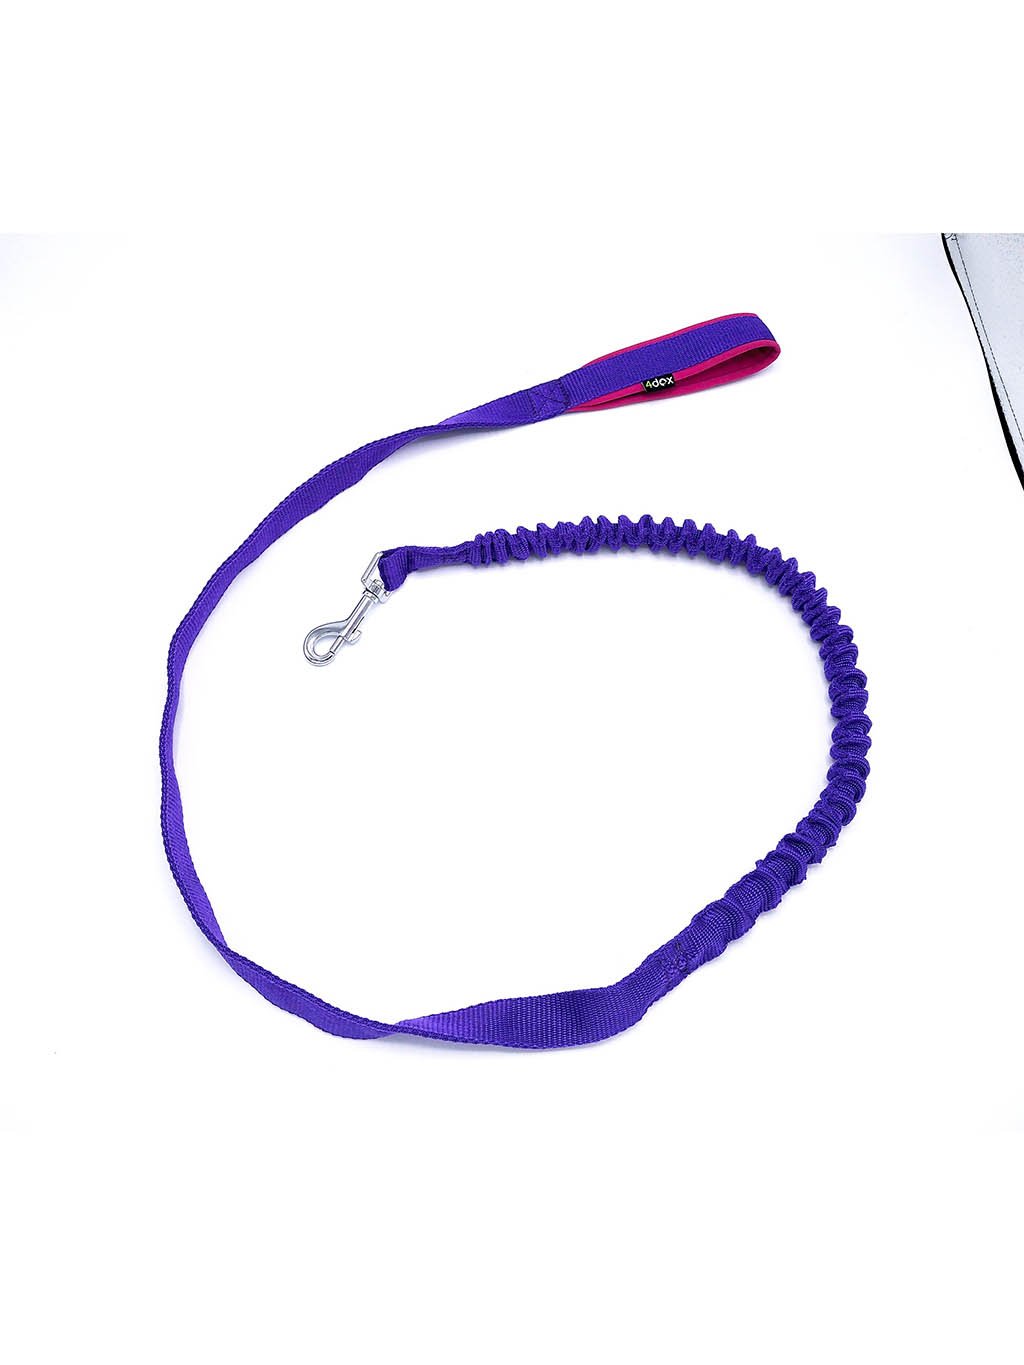 Leash with a shock absorber PURPLE